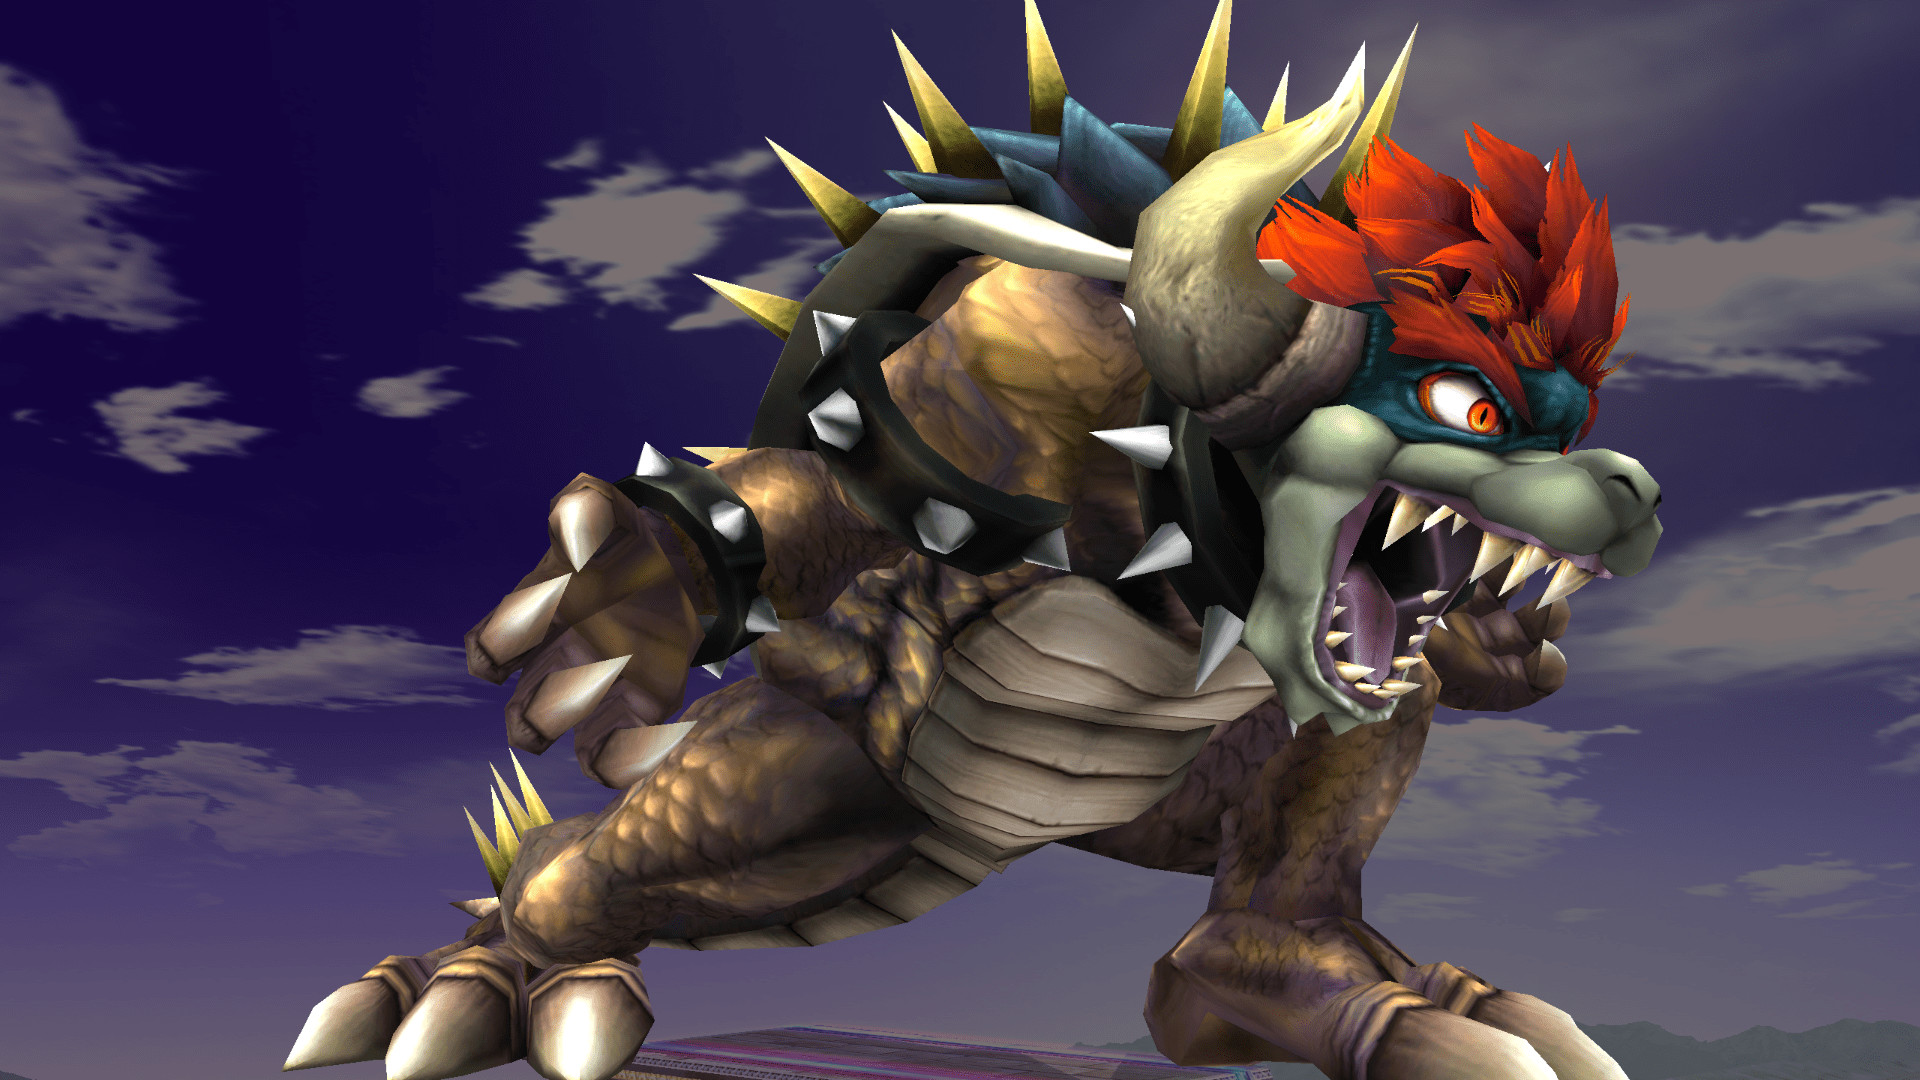 1920x1080 Cool cat bowser art pictures and ideas on meta networks png 600x337 Bowser  1080p wallpaper